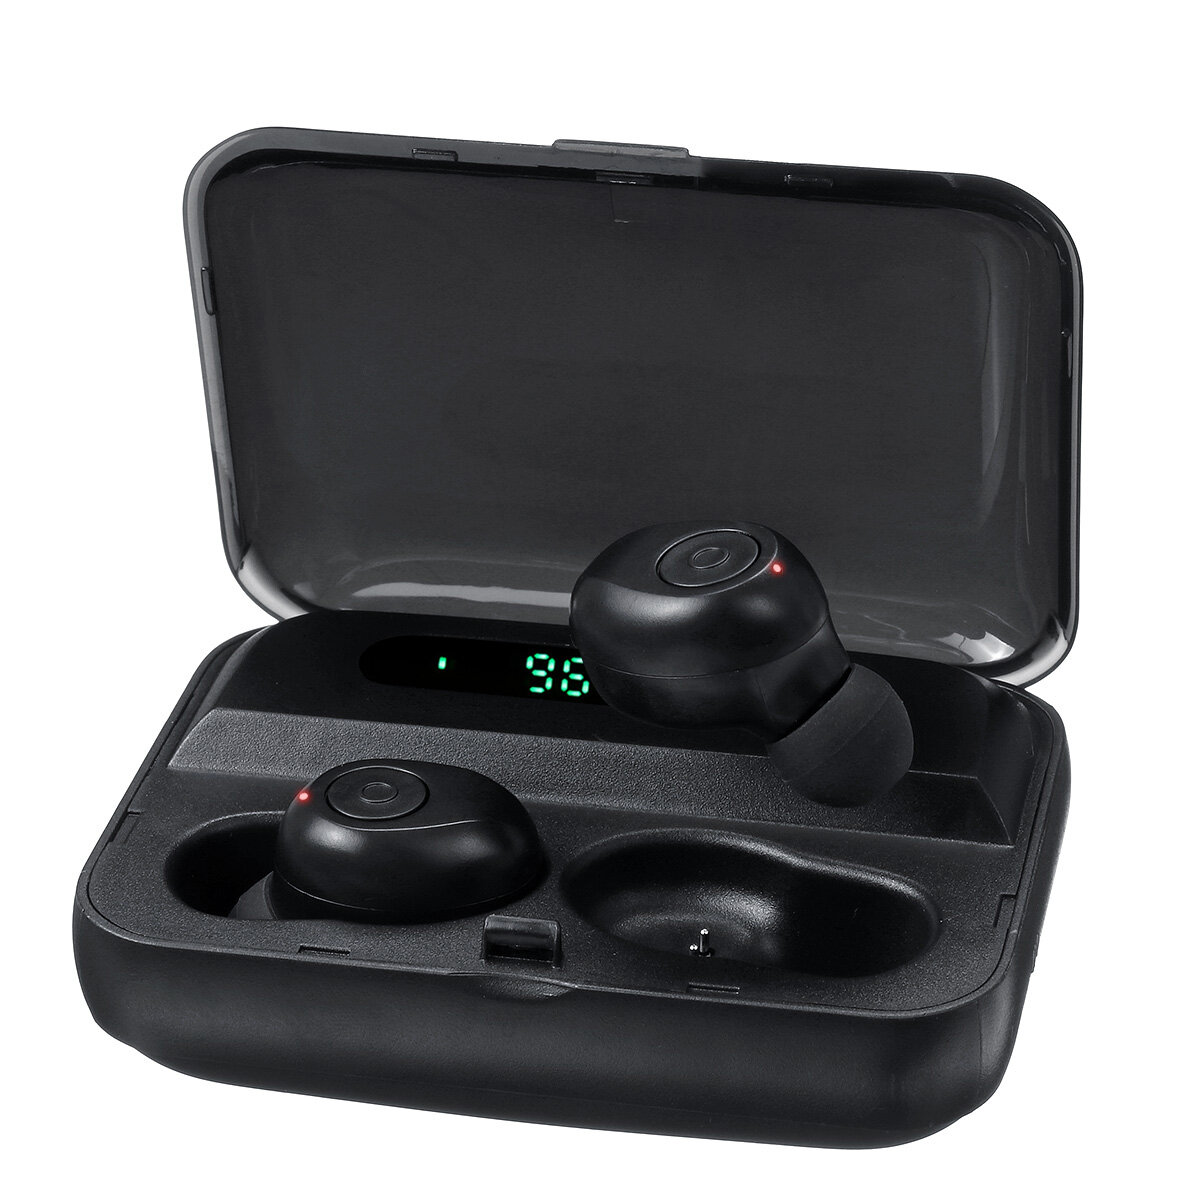 Portable TWS Wireless bluetooth Stereo Earphone Intelligent Control Waterproof Earbuds with LED Digi